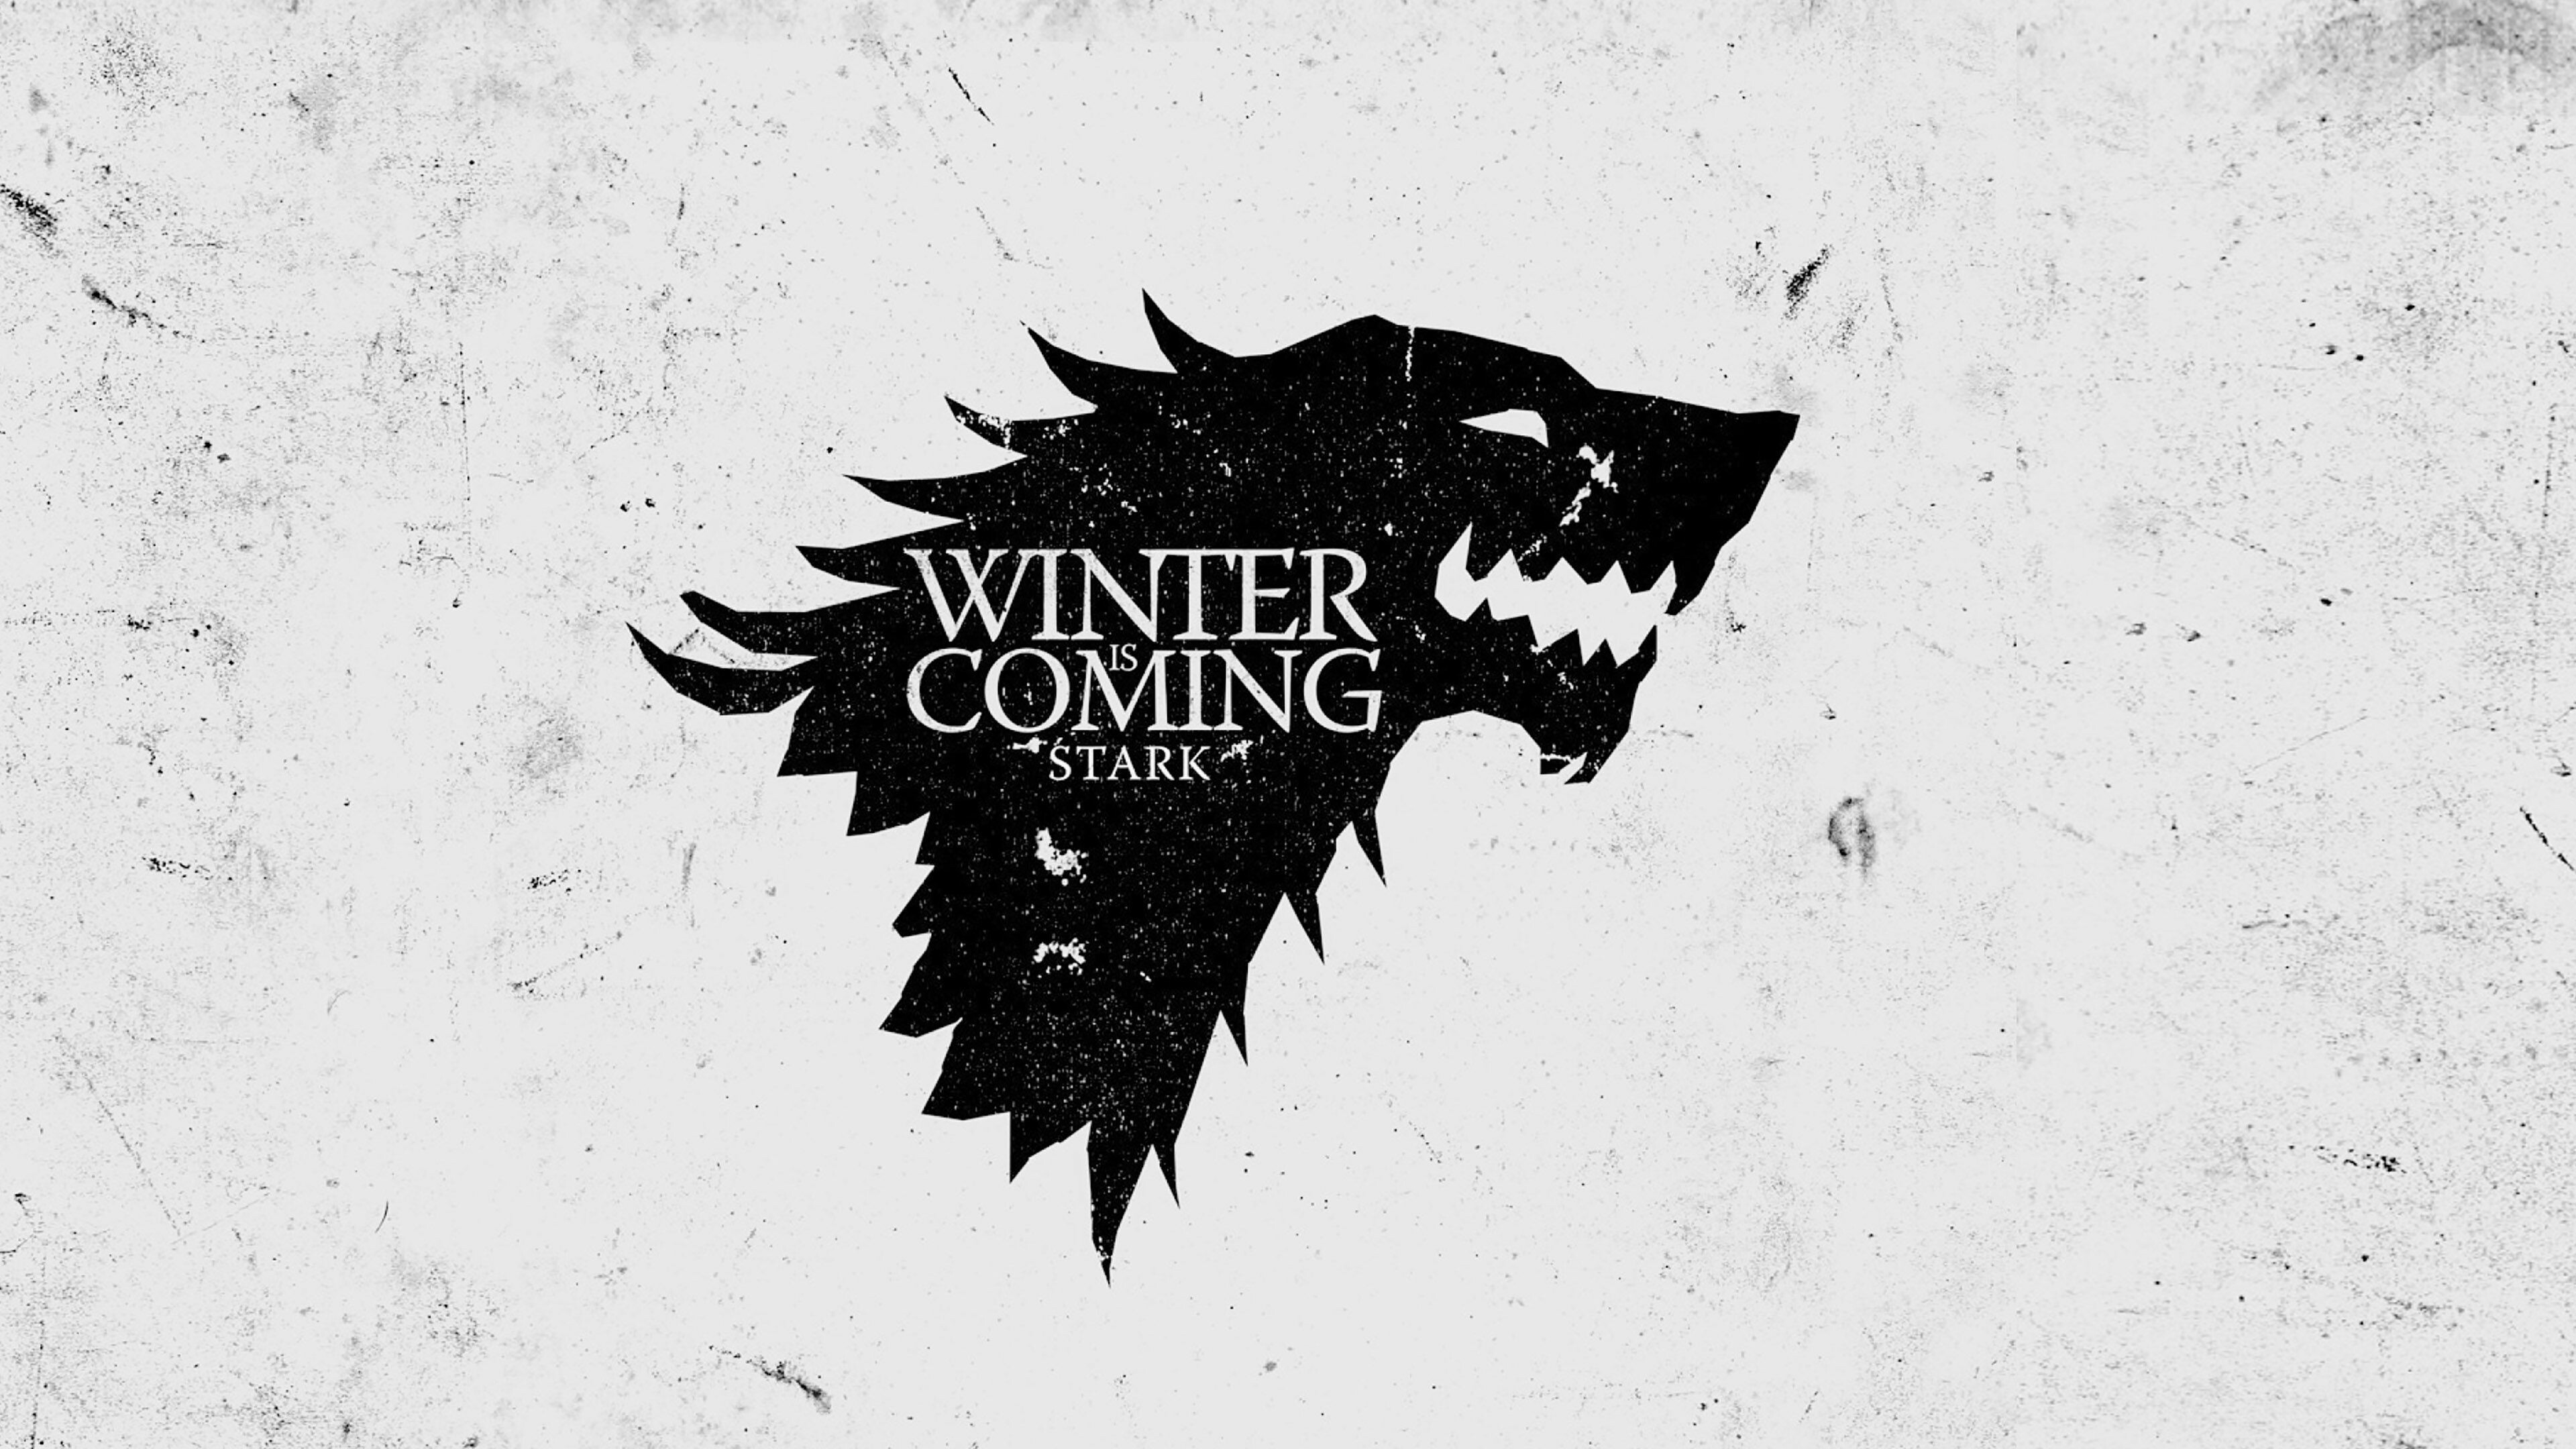 67+ Winter Is Coming Game of Thrones Wallpapers: HD, 4K, 5K for PC and  Mobile | Download free images for iPhone, Android